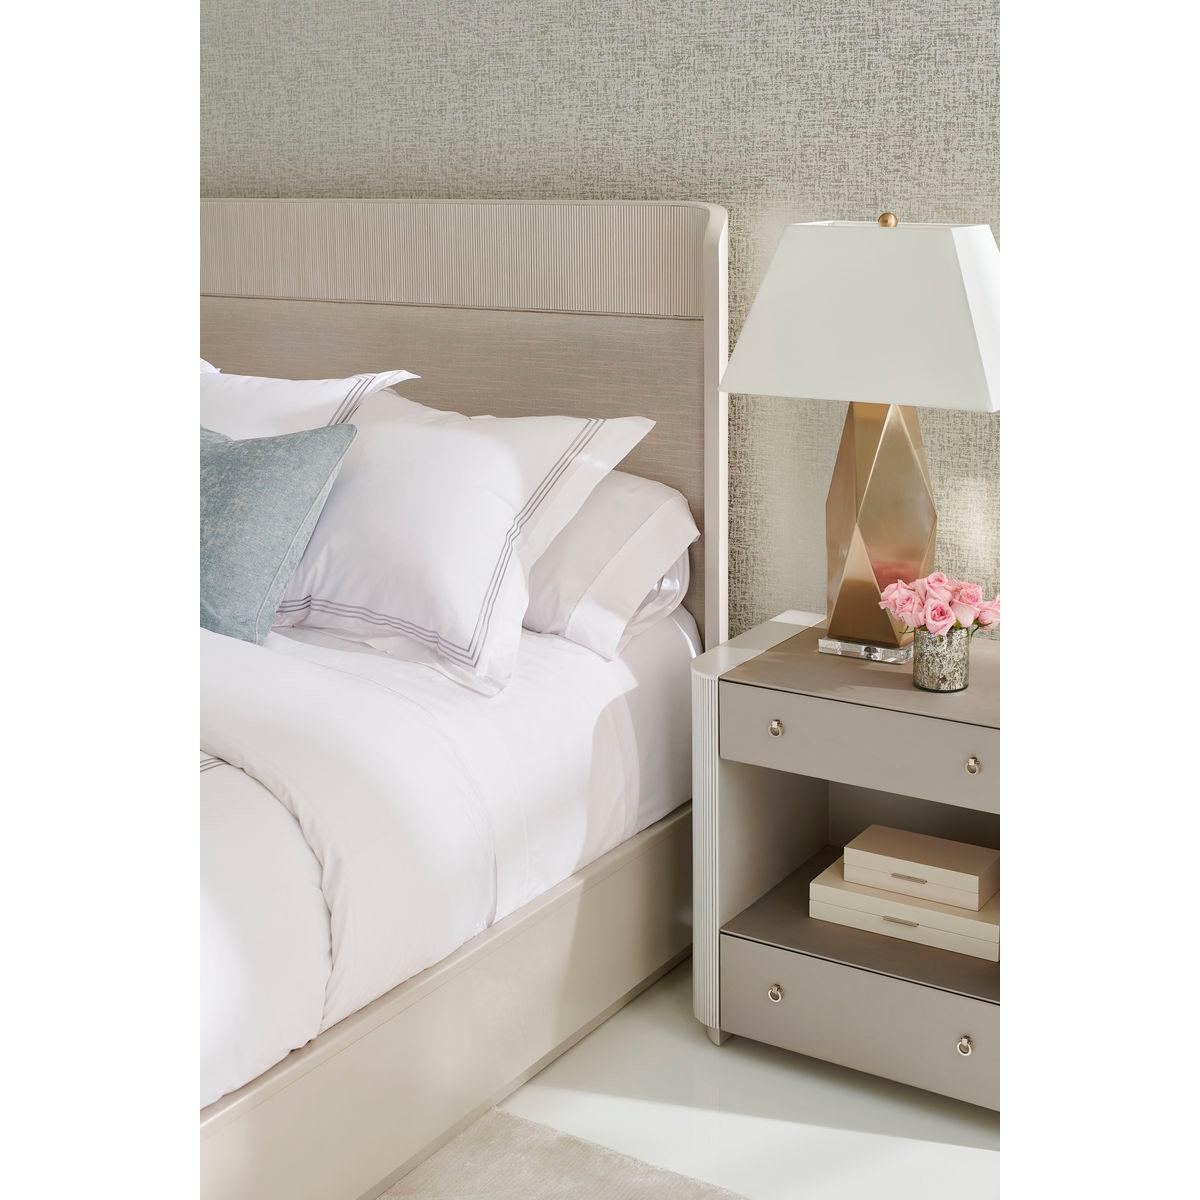 With a softly curved headboard that ensconces you in style, it boasts a thoughtful combination of luxe materials. As you lay back and rest your head, you’ll enjoy the soft support of an exquisitely upholstered headboard framed with wood trim